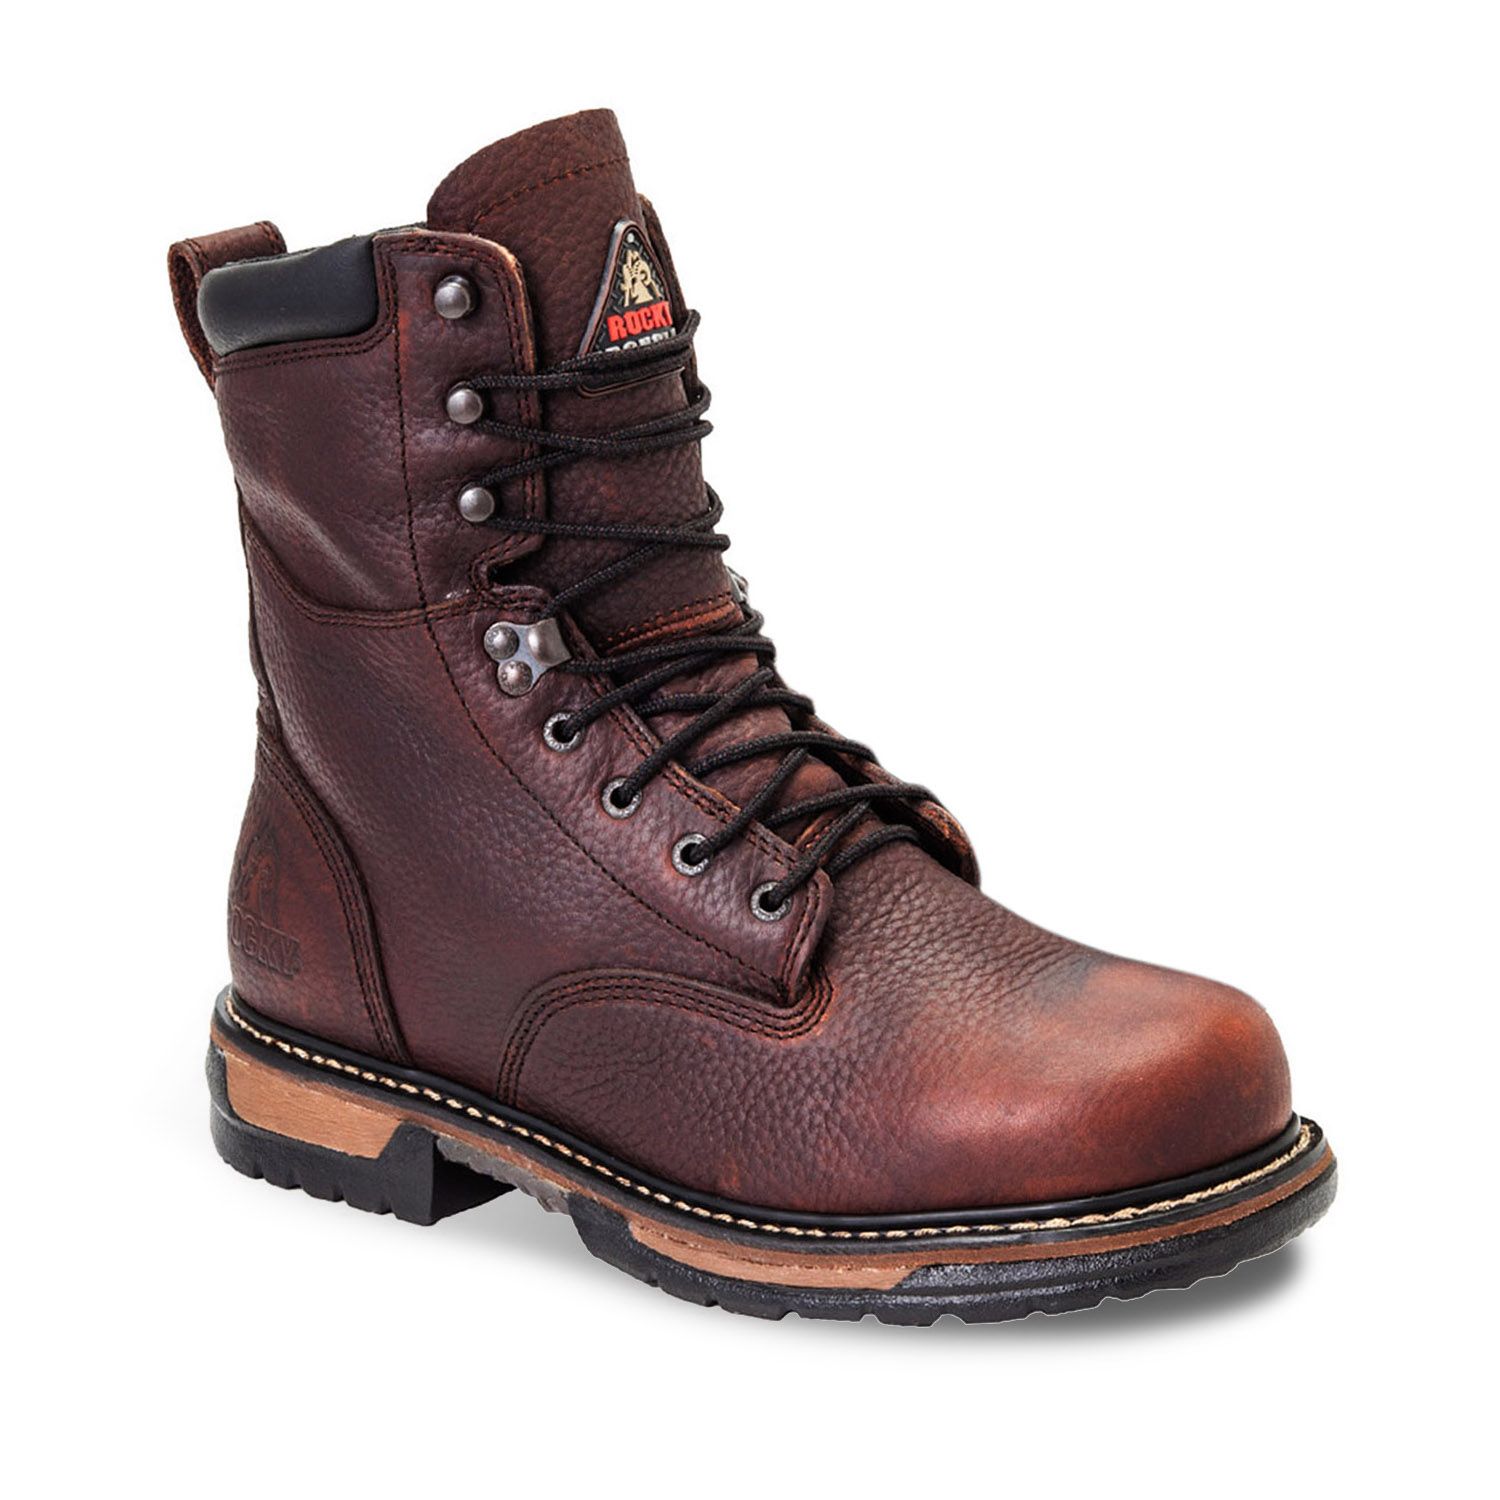 men's work boots at kohl's